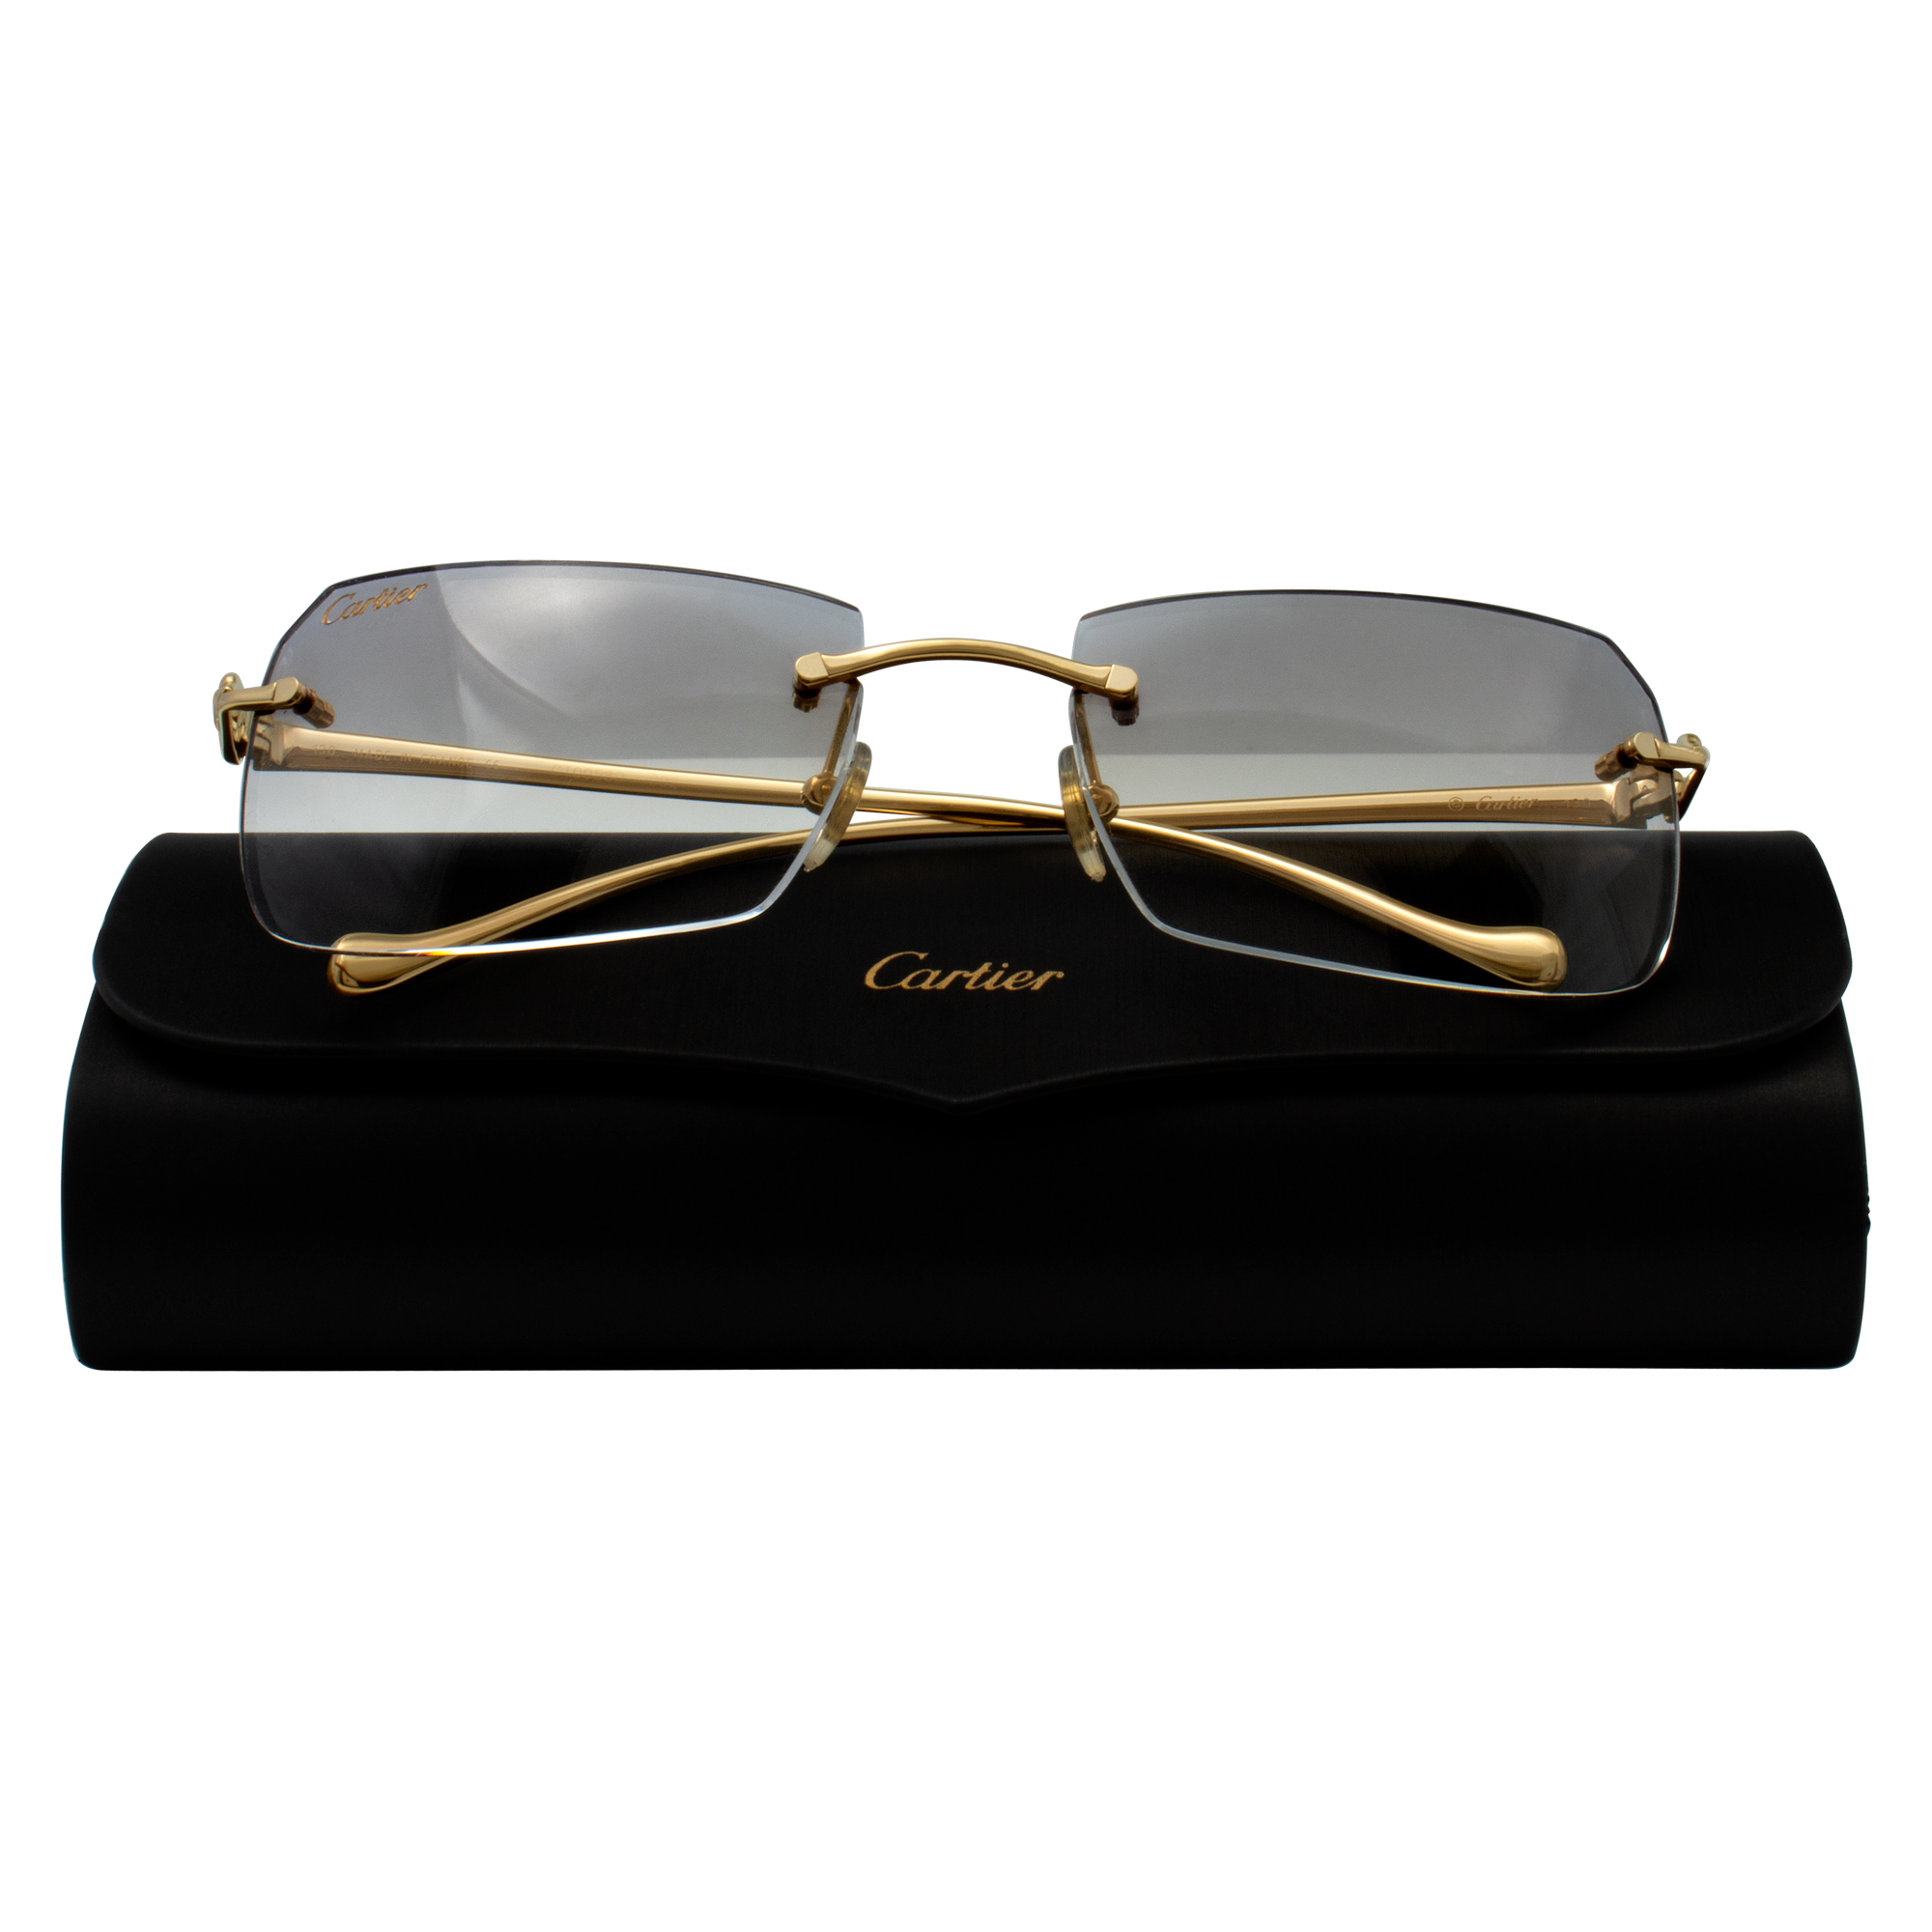 Cartier Panthere Sunglasses image 2